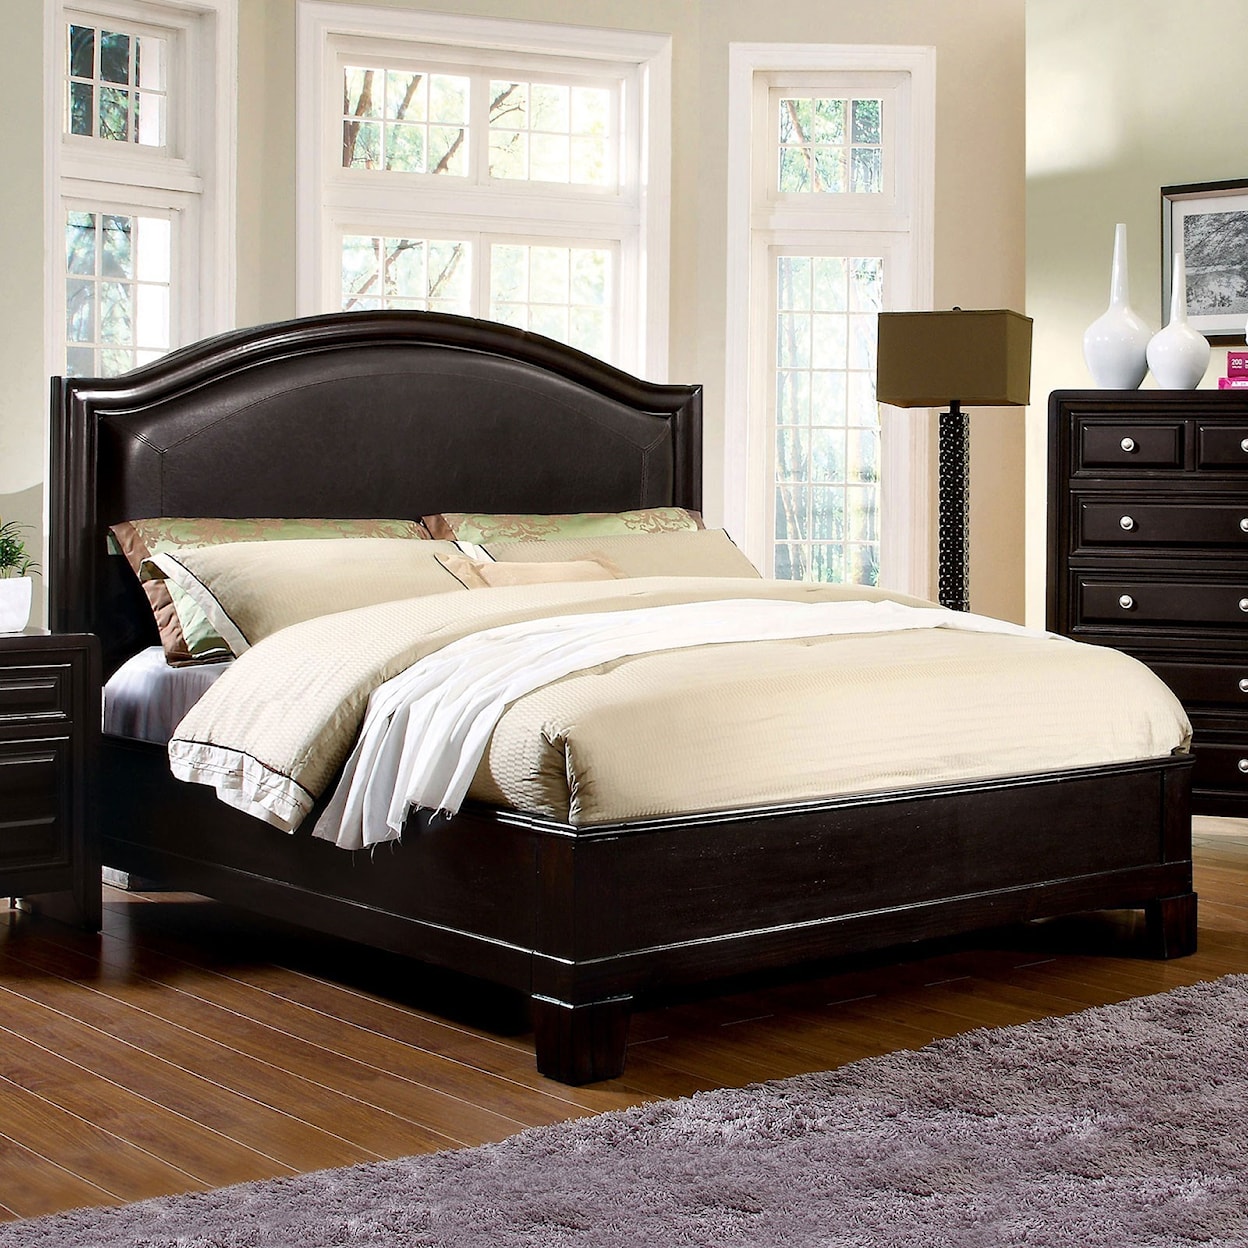 Furniture of America Winsor King Bed